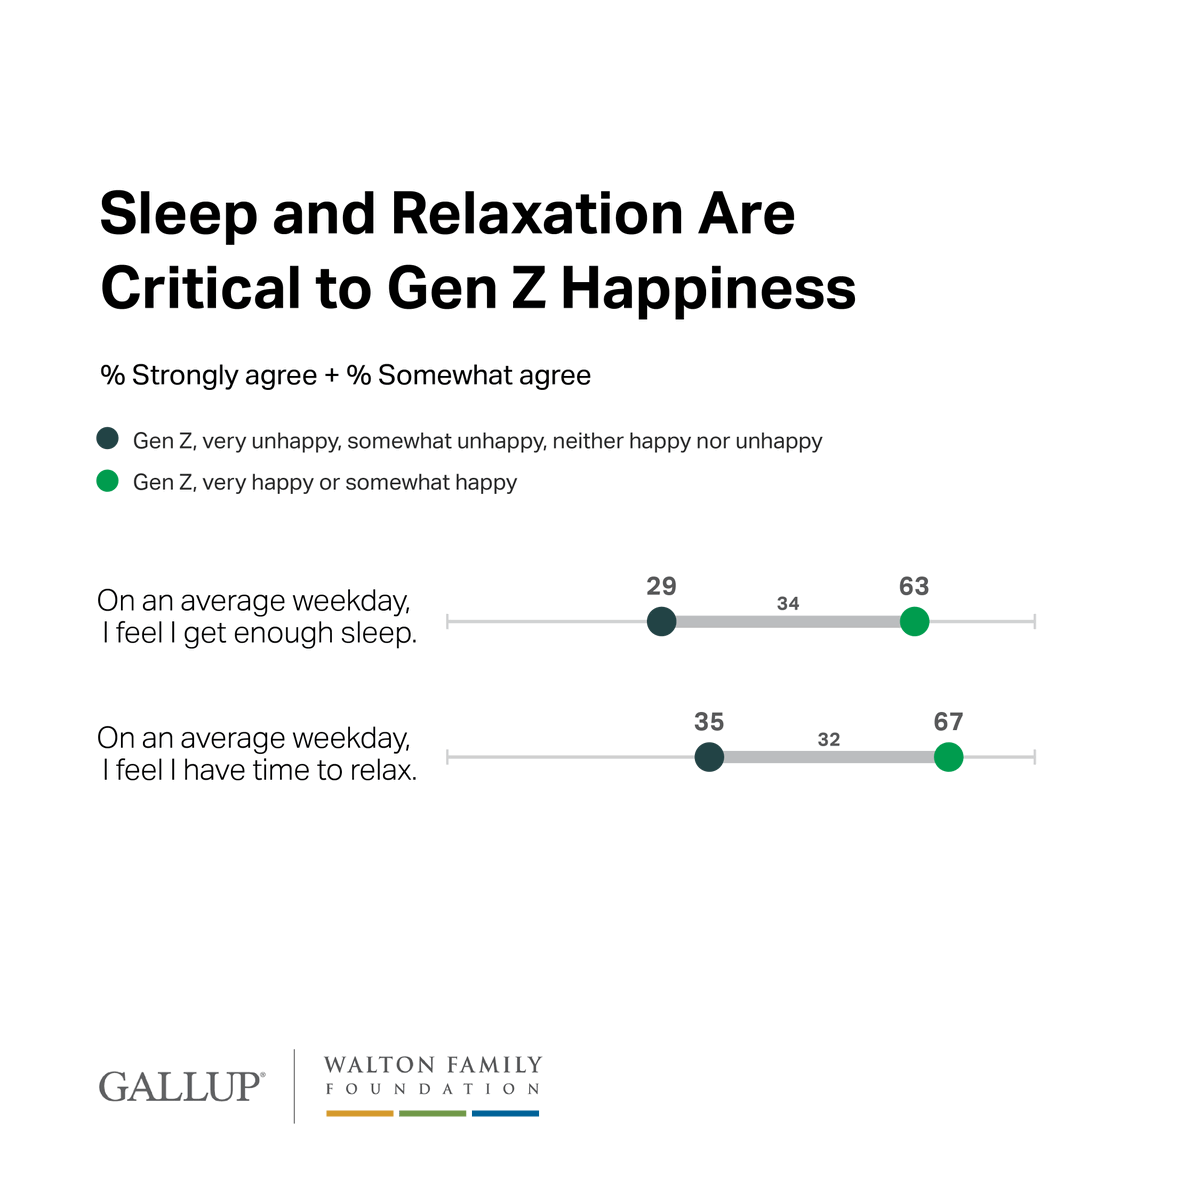 Sleep and relaxation are highly influential in happiness: Gen Zers who usually have enough time during the week to sleep and relax are twice as likely as those who do not to say they are happy. Learn what we discovered with @WaltonFamilyFdn. on.gallup.com/3vRoLau